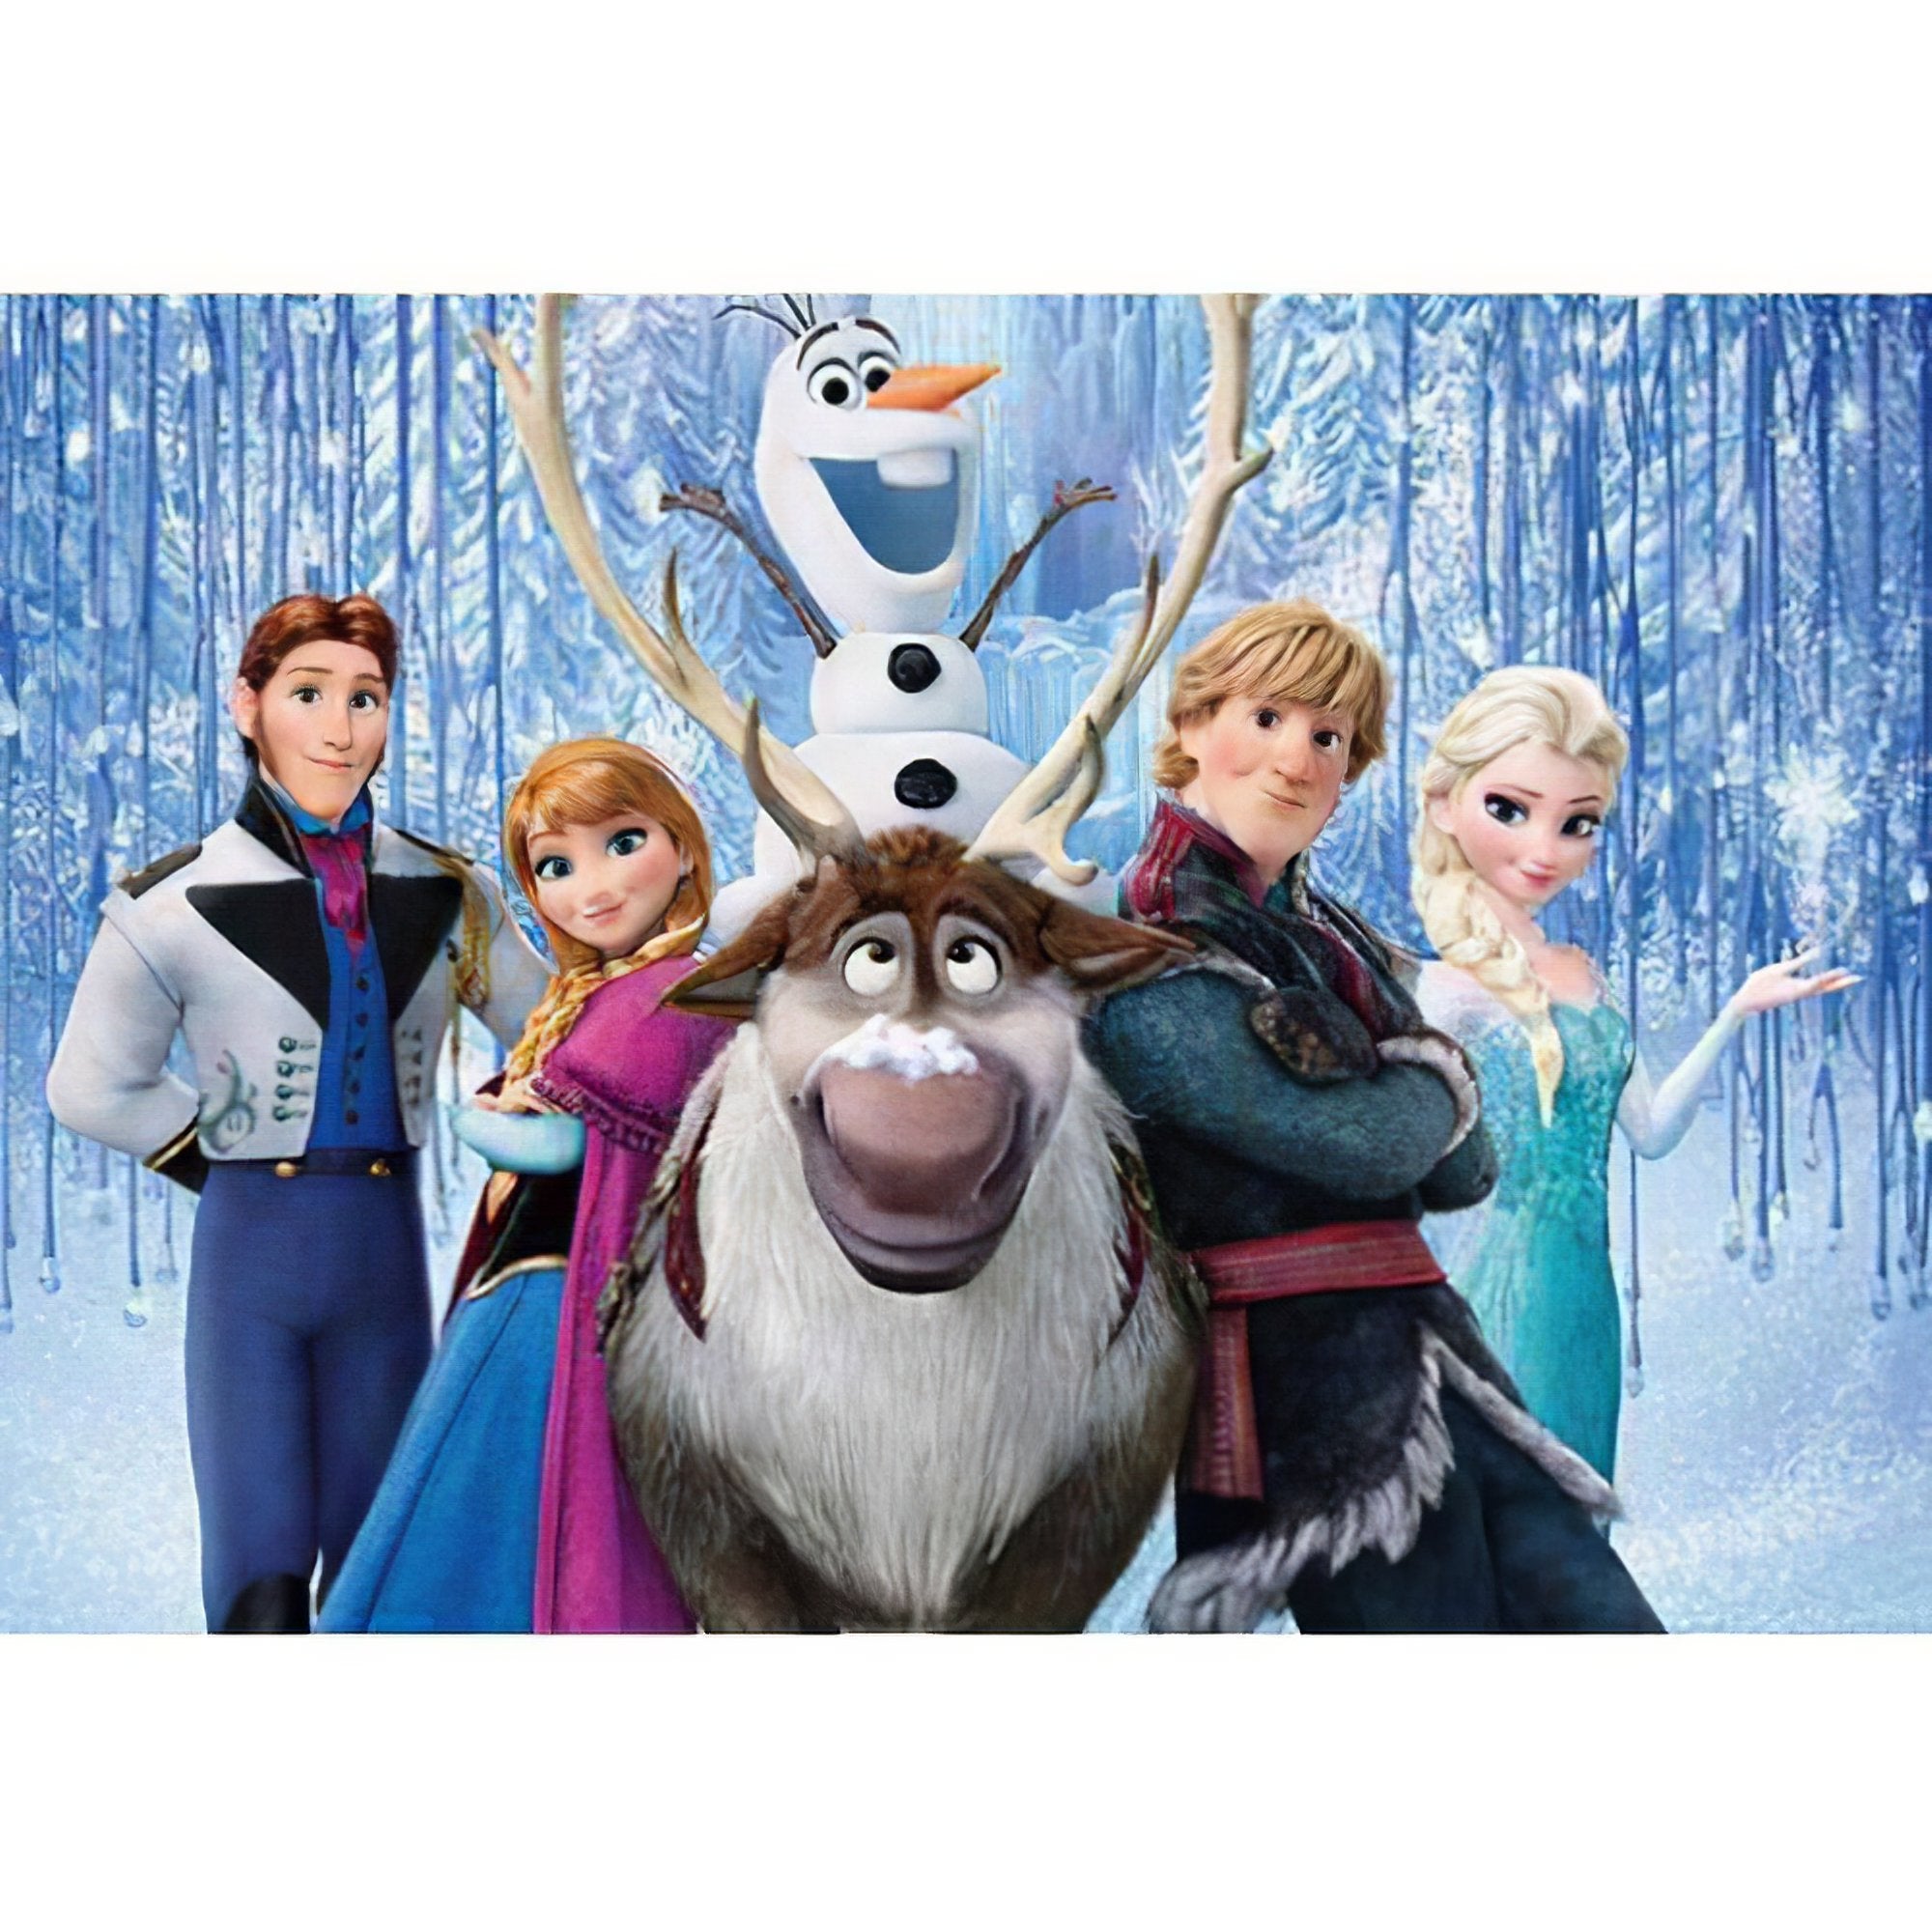 Relive the magic of Frozen with sparkling ice scenes. Frozen - Diamondartlove